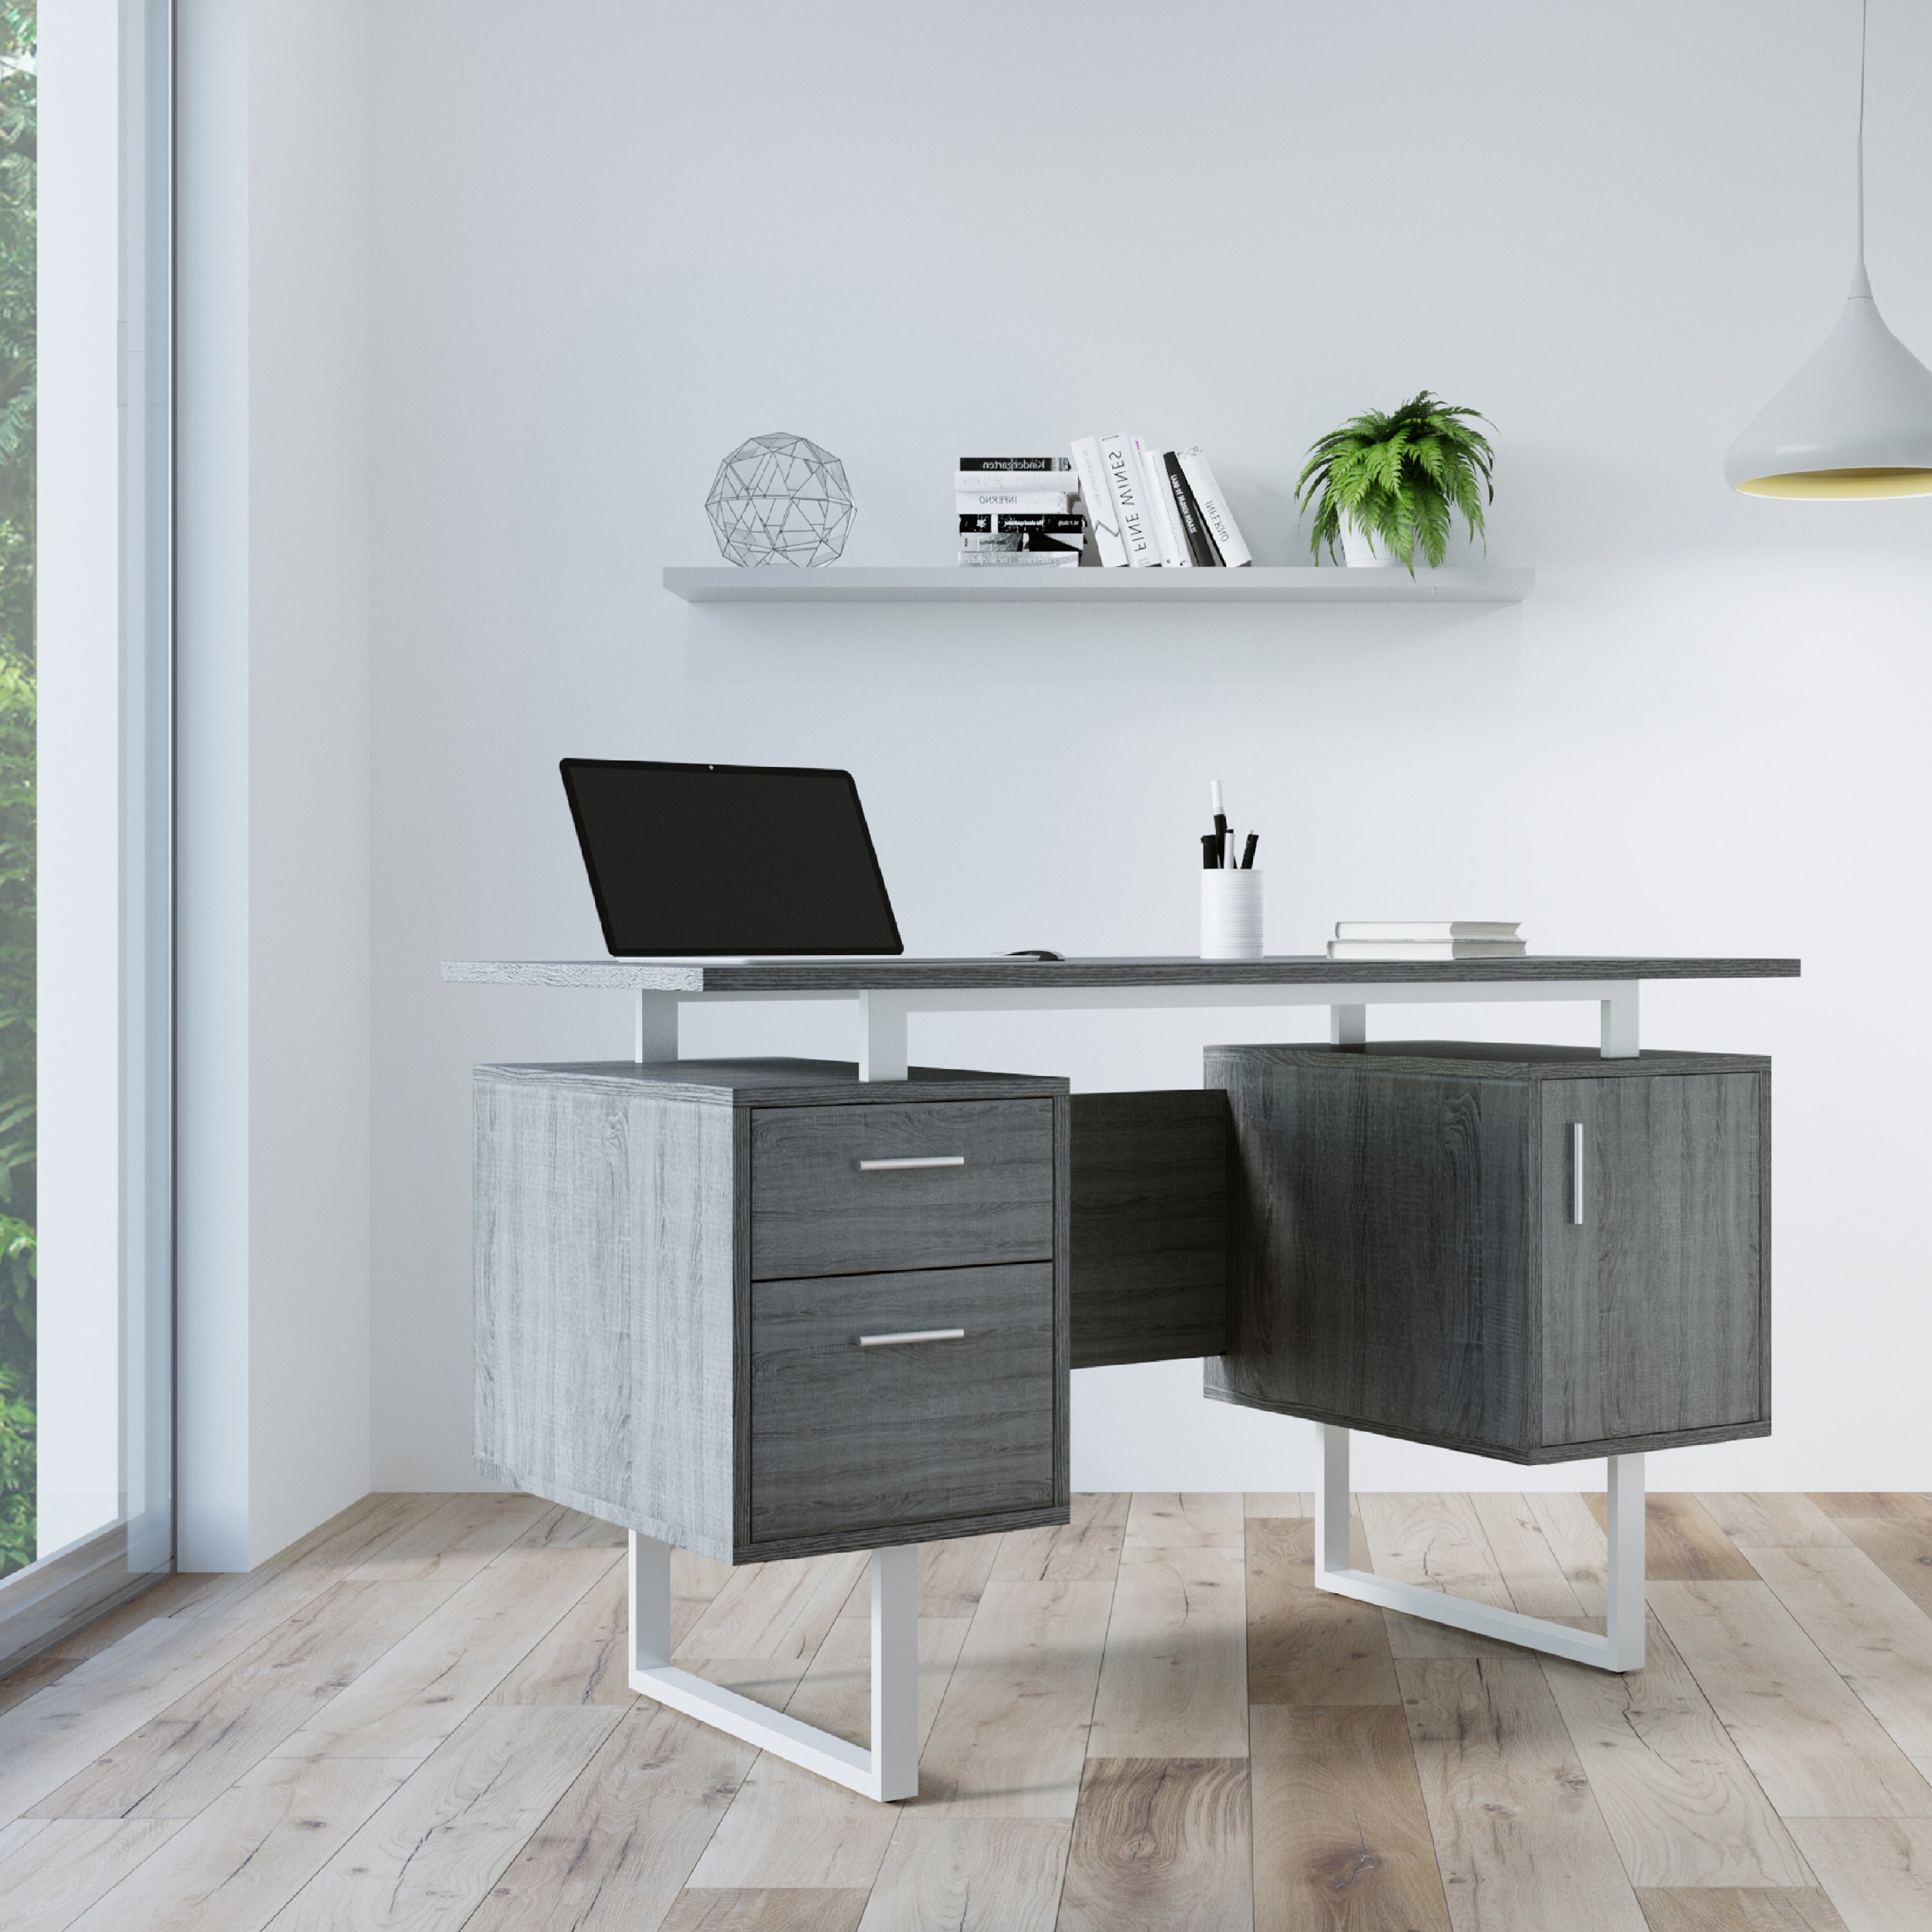 https://ak1.ostkcdn.com/images/products/is/images/direct/7e440ae0166635b187724c0bc06fb1334695ac45/Modern-Office-Desk-with-2-Drawers-and-Door-Storage%2C-Grey.jpg